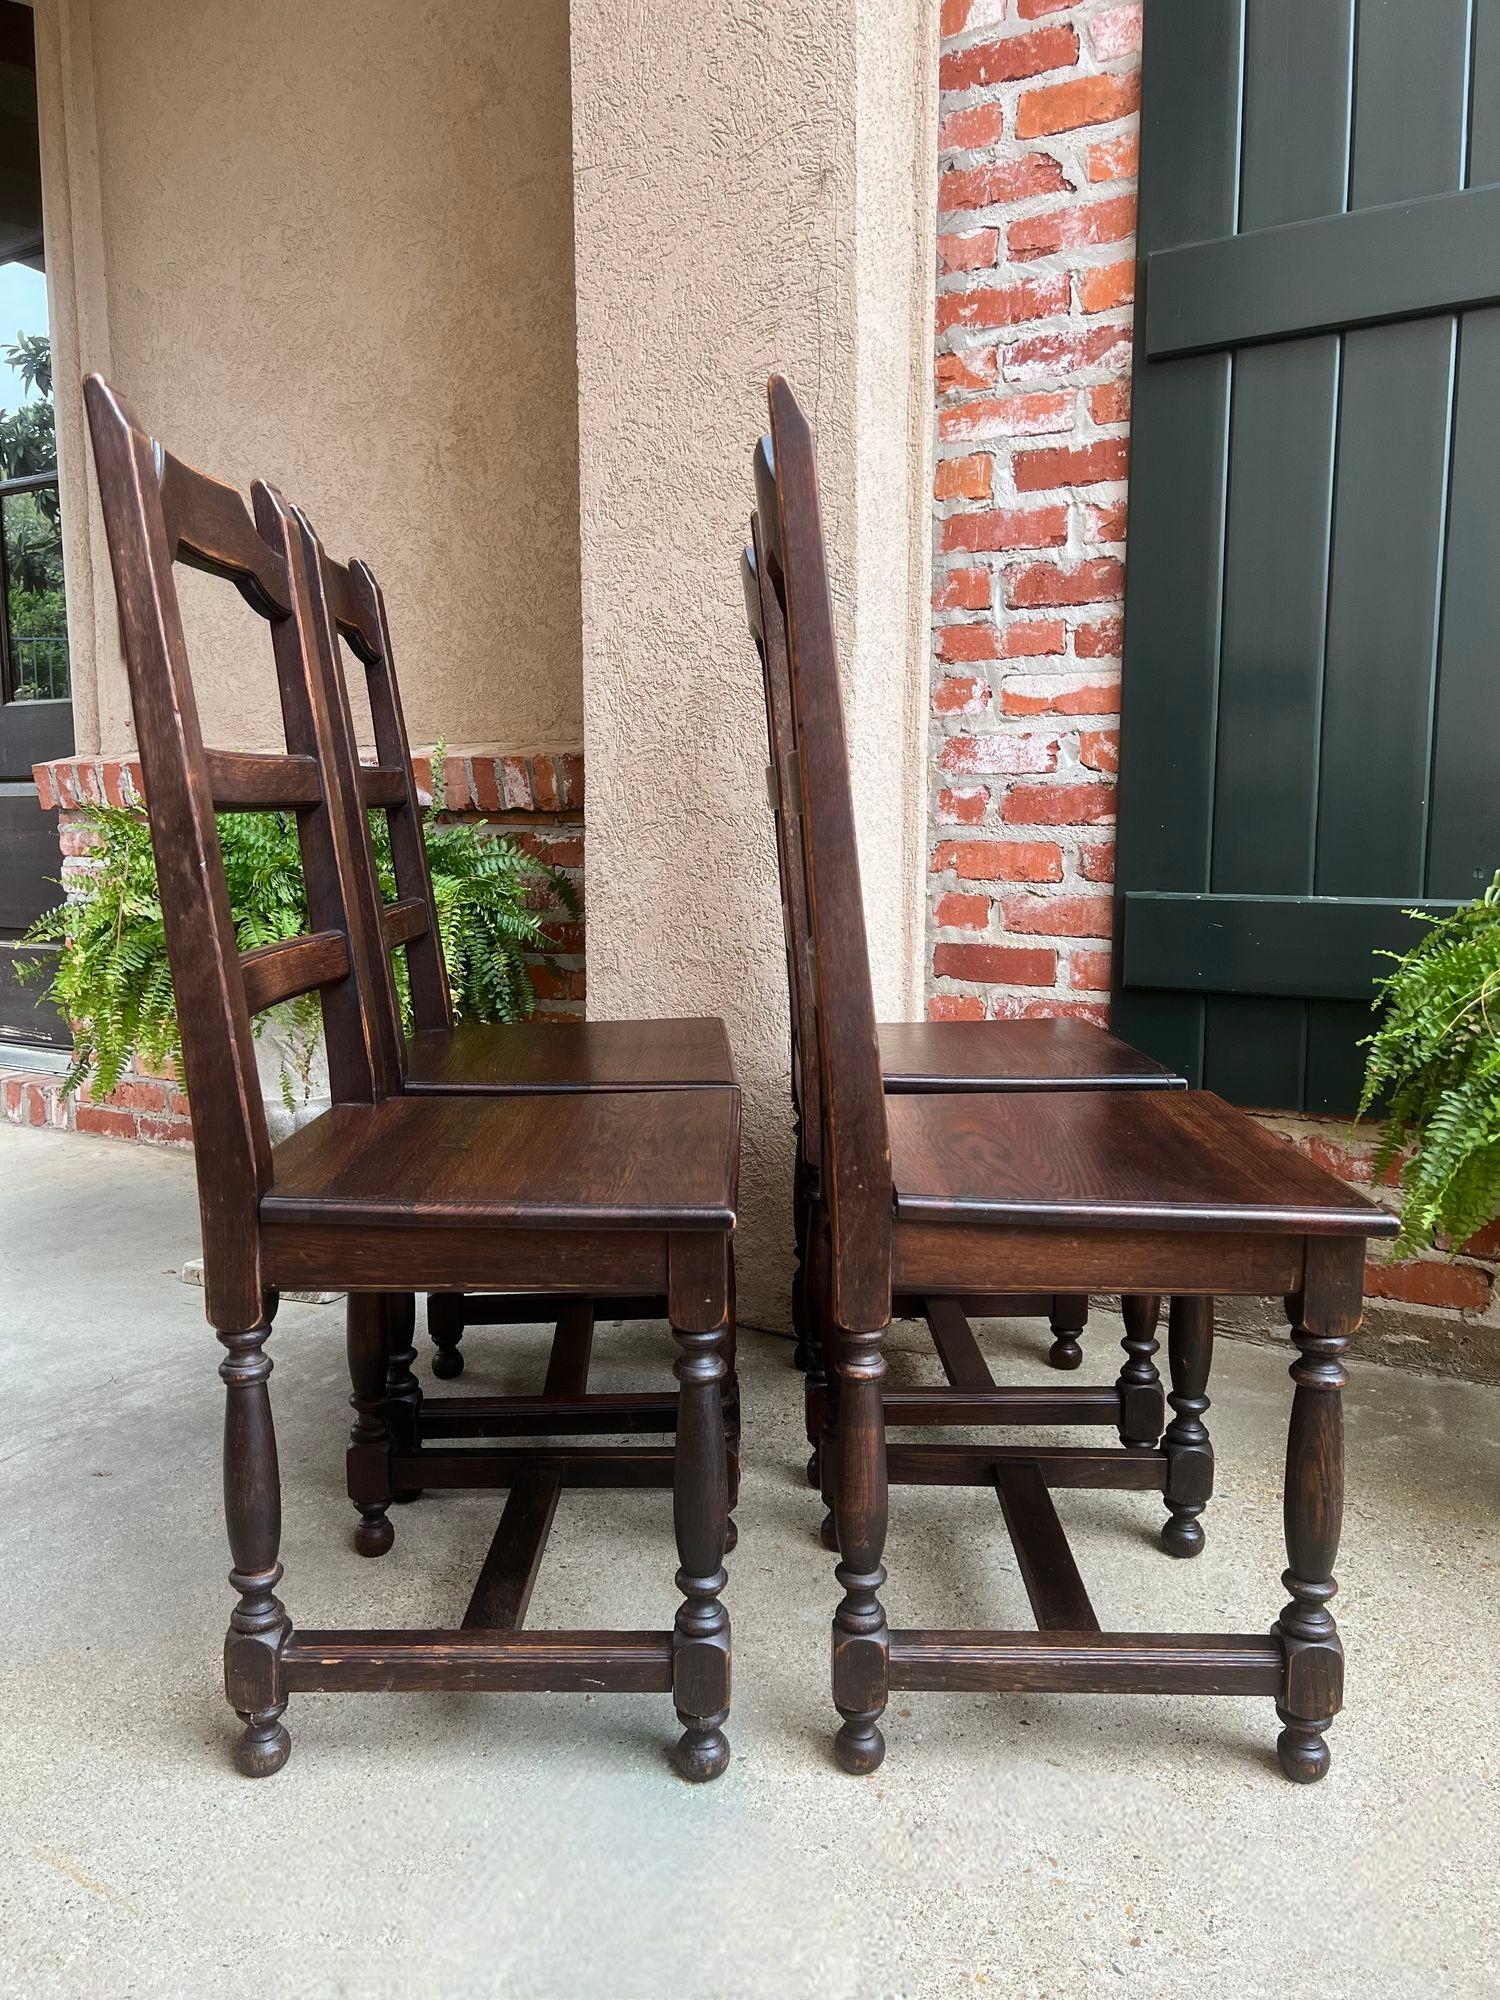 SET 4 Antique French Country Dining Chair Ladder Back Carved Dark Oak In Good Condition For Sale In Shreveport, LA